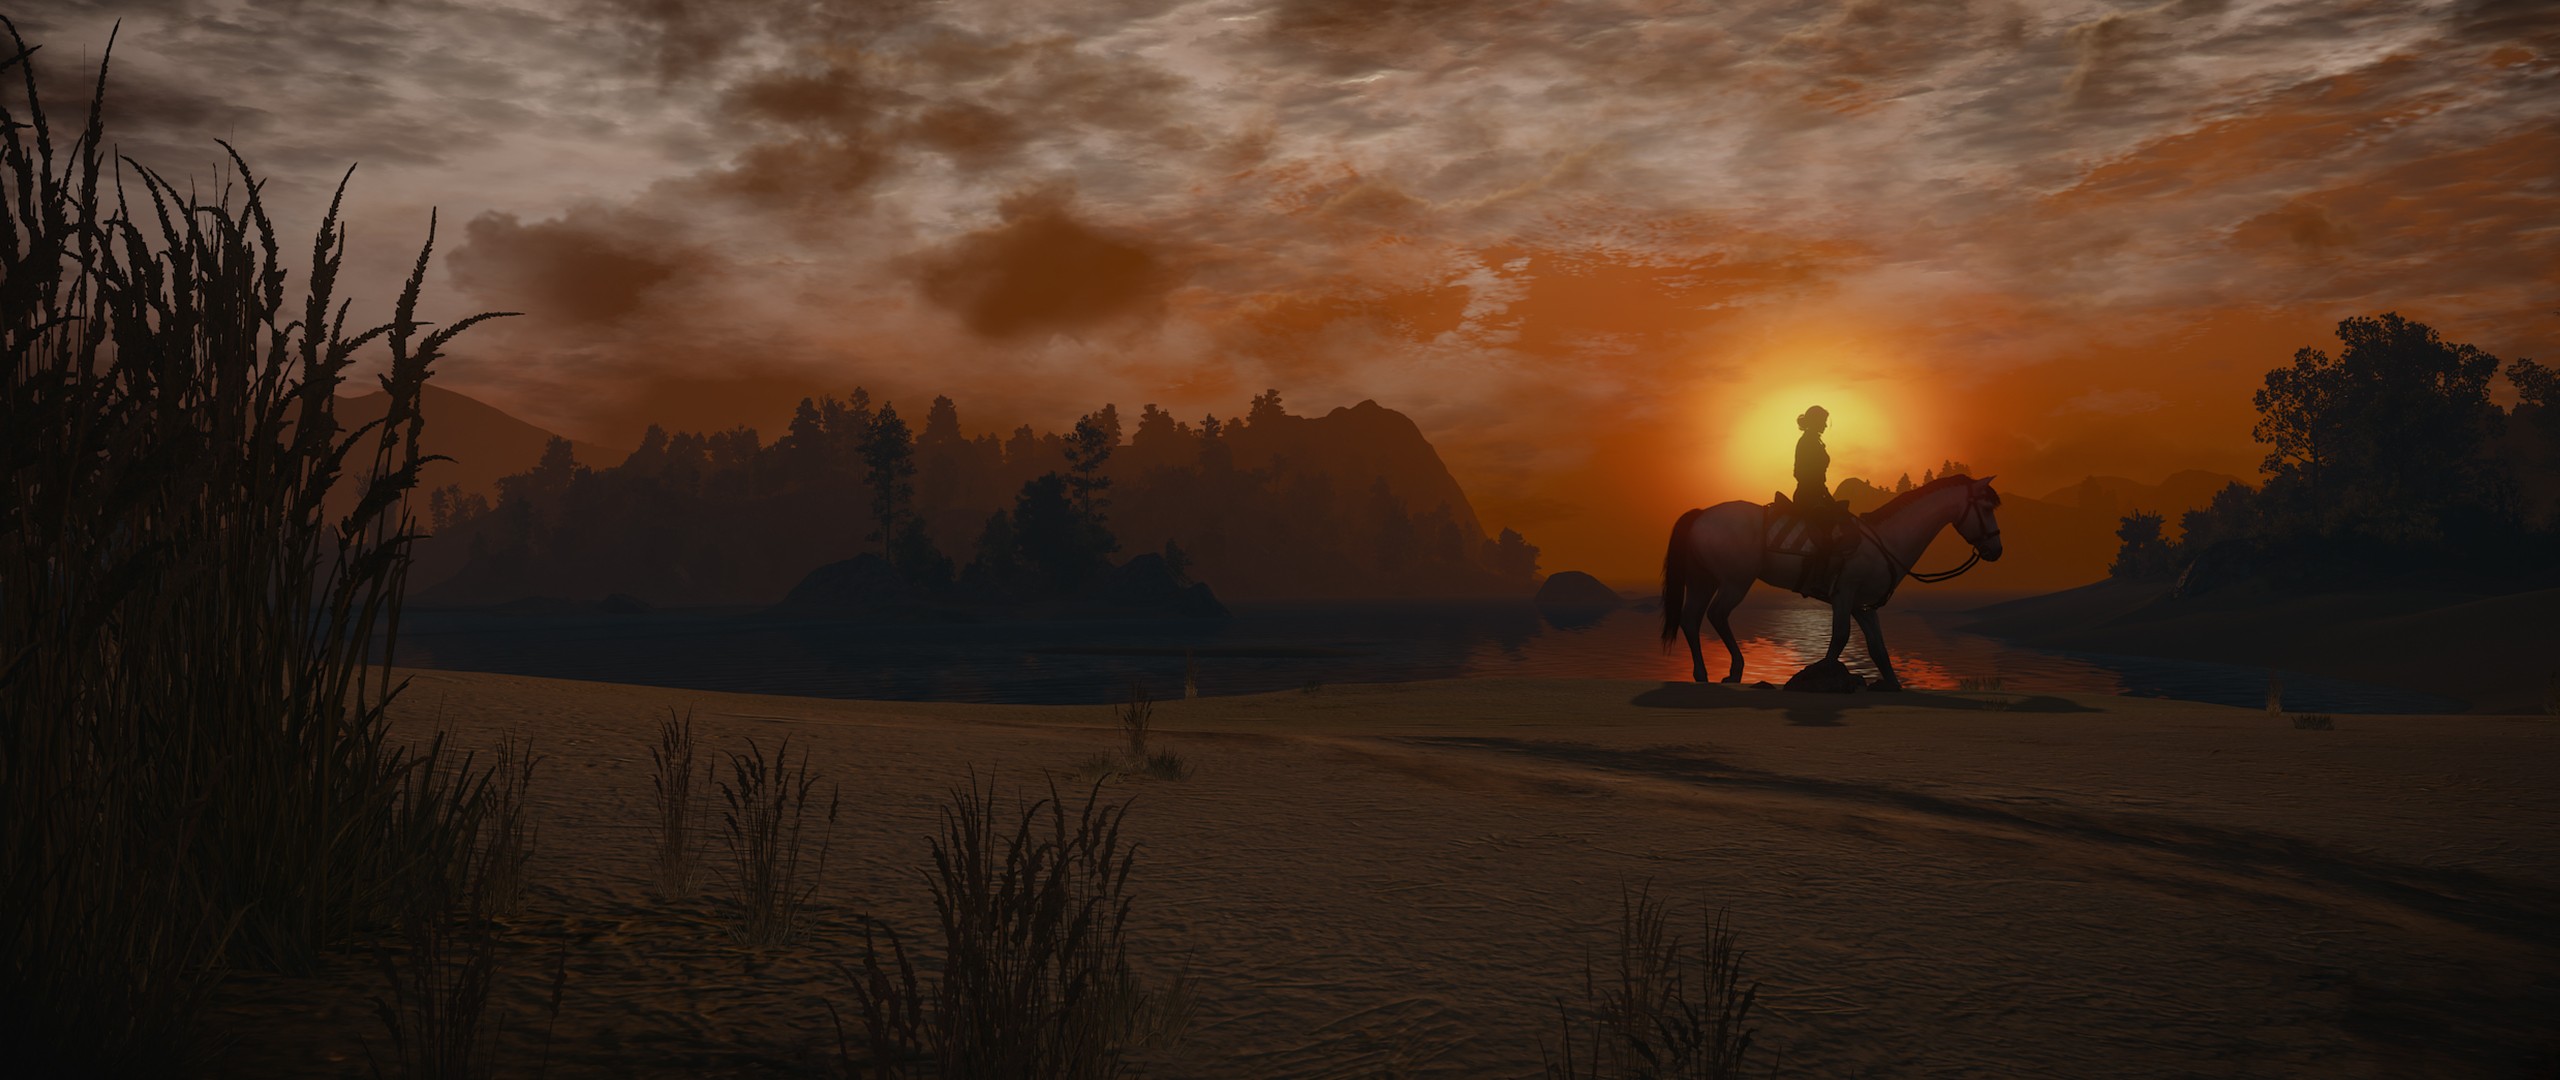 The Witcher 3: Wild Hunt, Video games, Horse, Sunlight, Sky, The Witcher Wallpaper